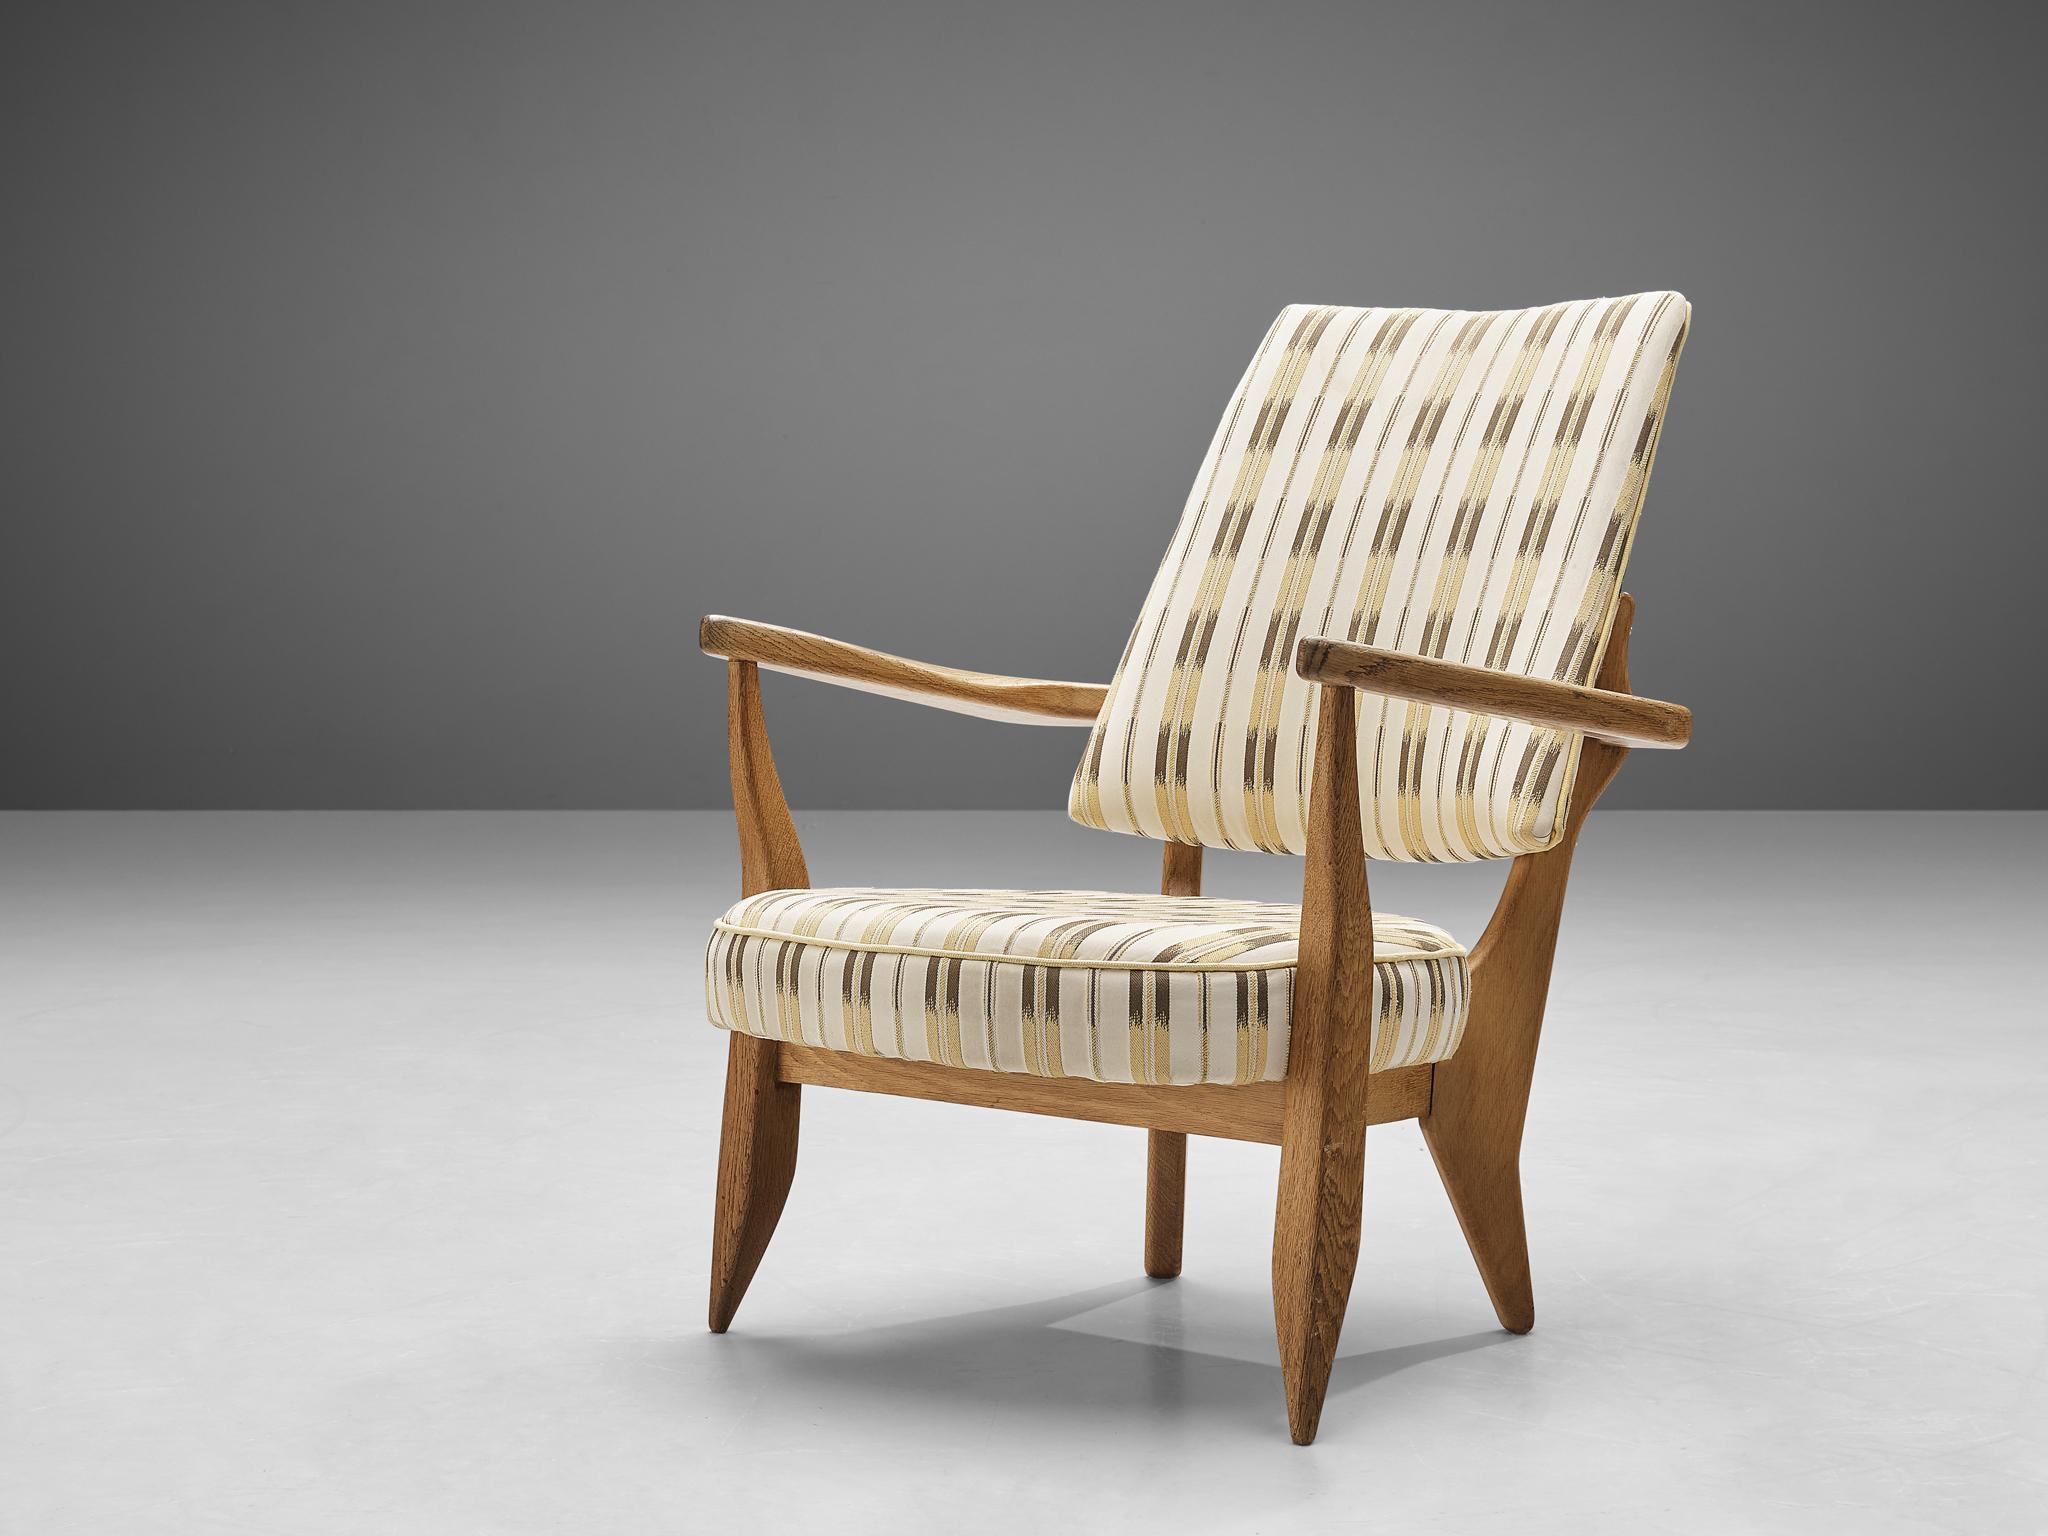 Guillerme et Chambron, easy chair, patterned fabric, oak, France, 1950s 

This sculptural easy chair by Guillerme et Chambron is very well executed and made out of solid, carved oak. The comfortable armchair features an interesting open